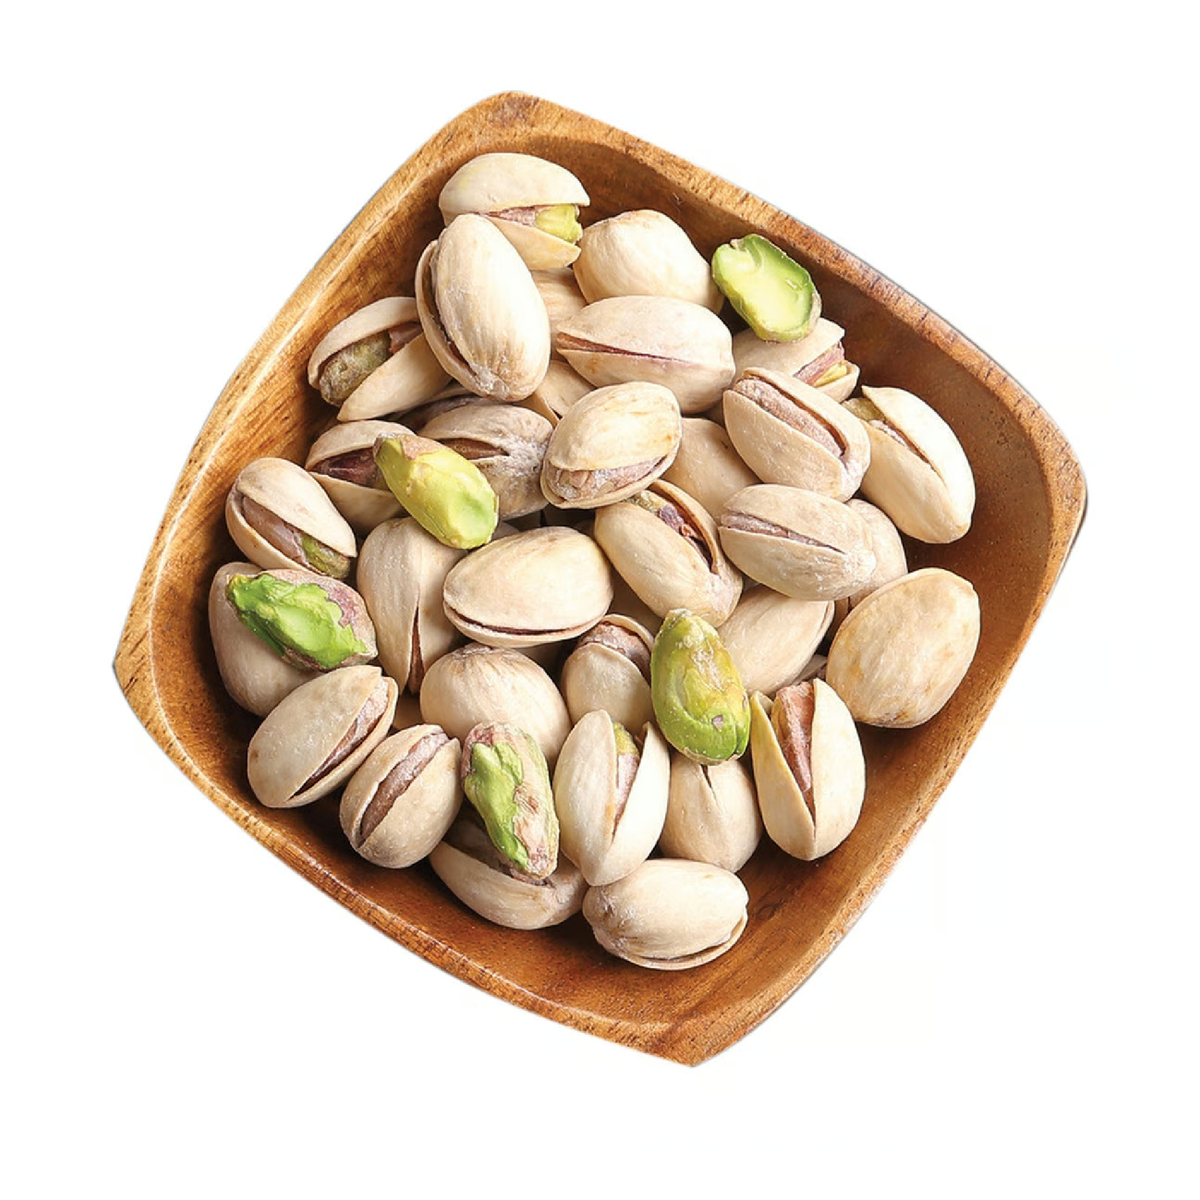 Buy USA Salted Roasted Pistachio 500 g Online at Best Price | Roastery Nuts | Lulu Kuwait in Kuwait